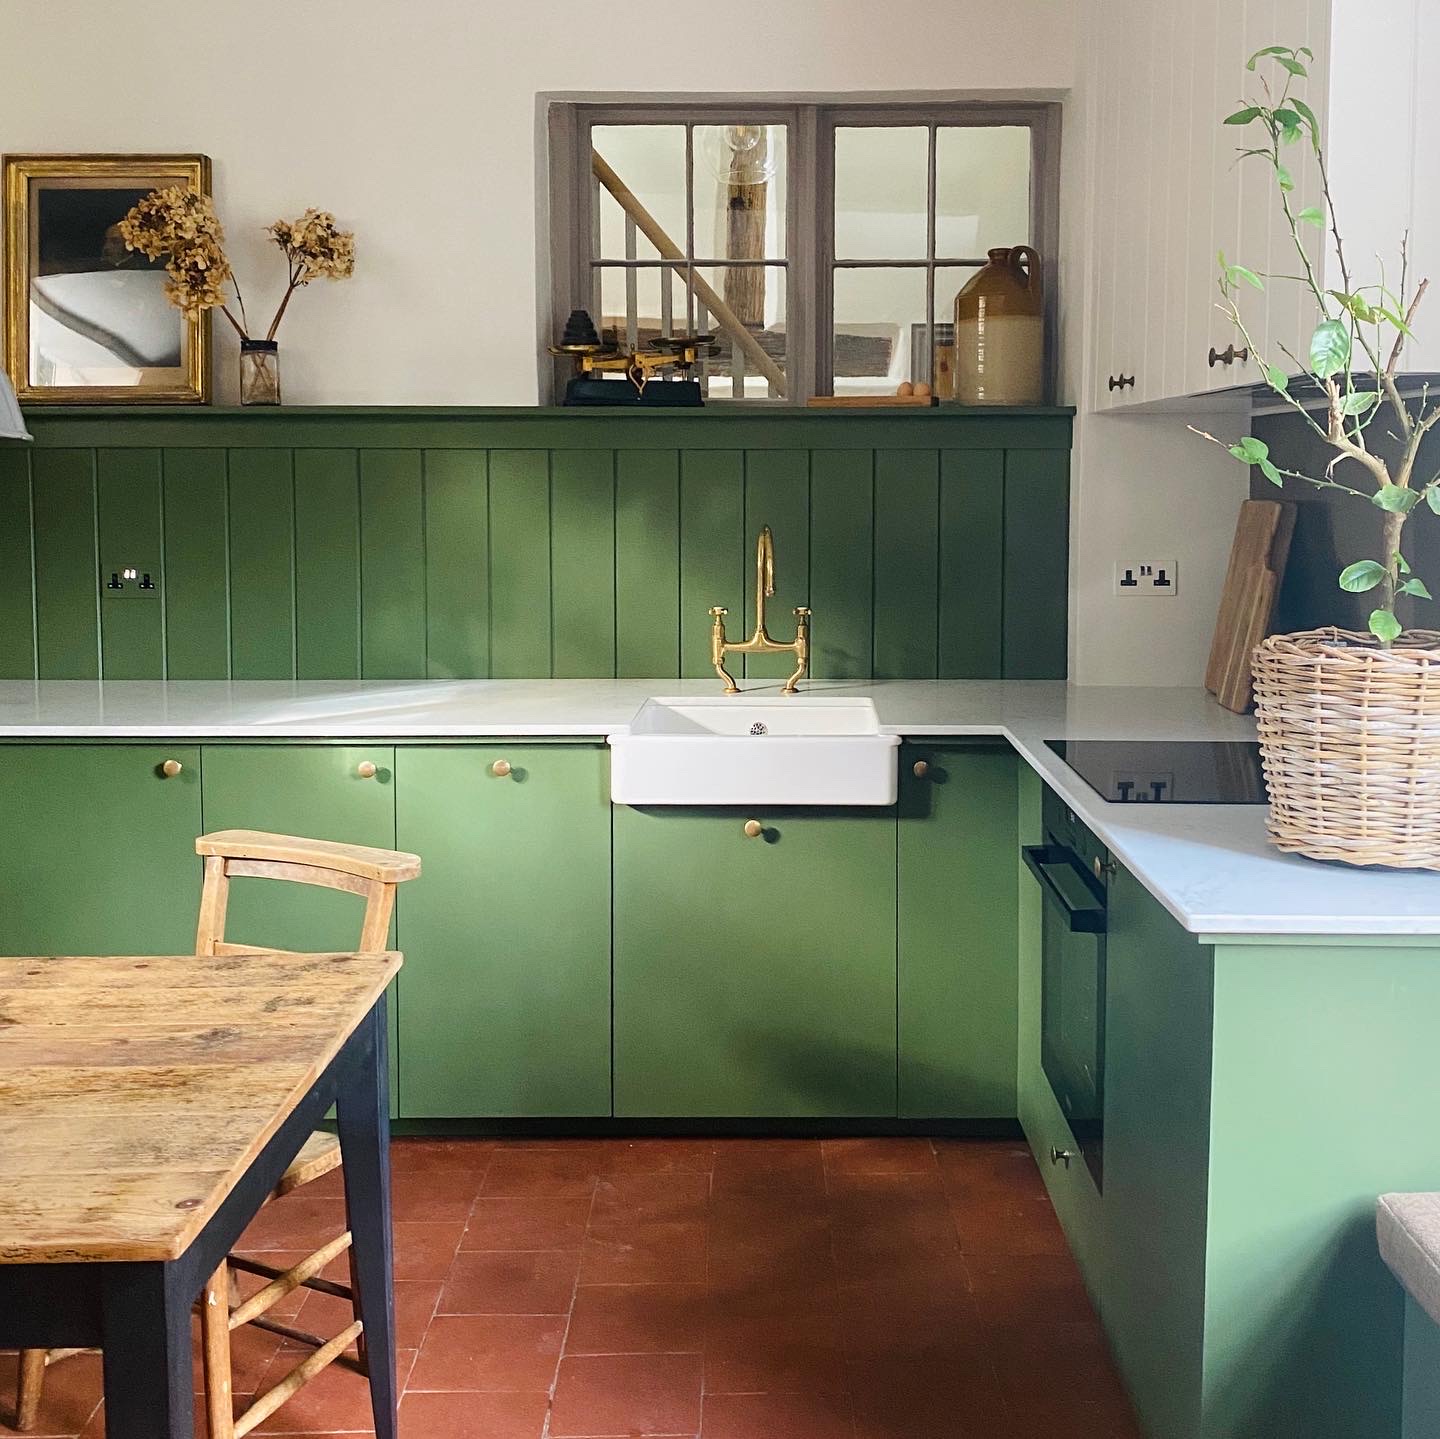 The 10 Best Ikea Kitchen S For A, Pine Kitchen Cabinets Ikea